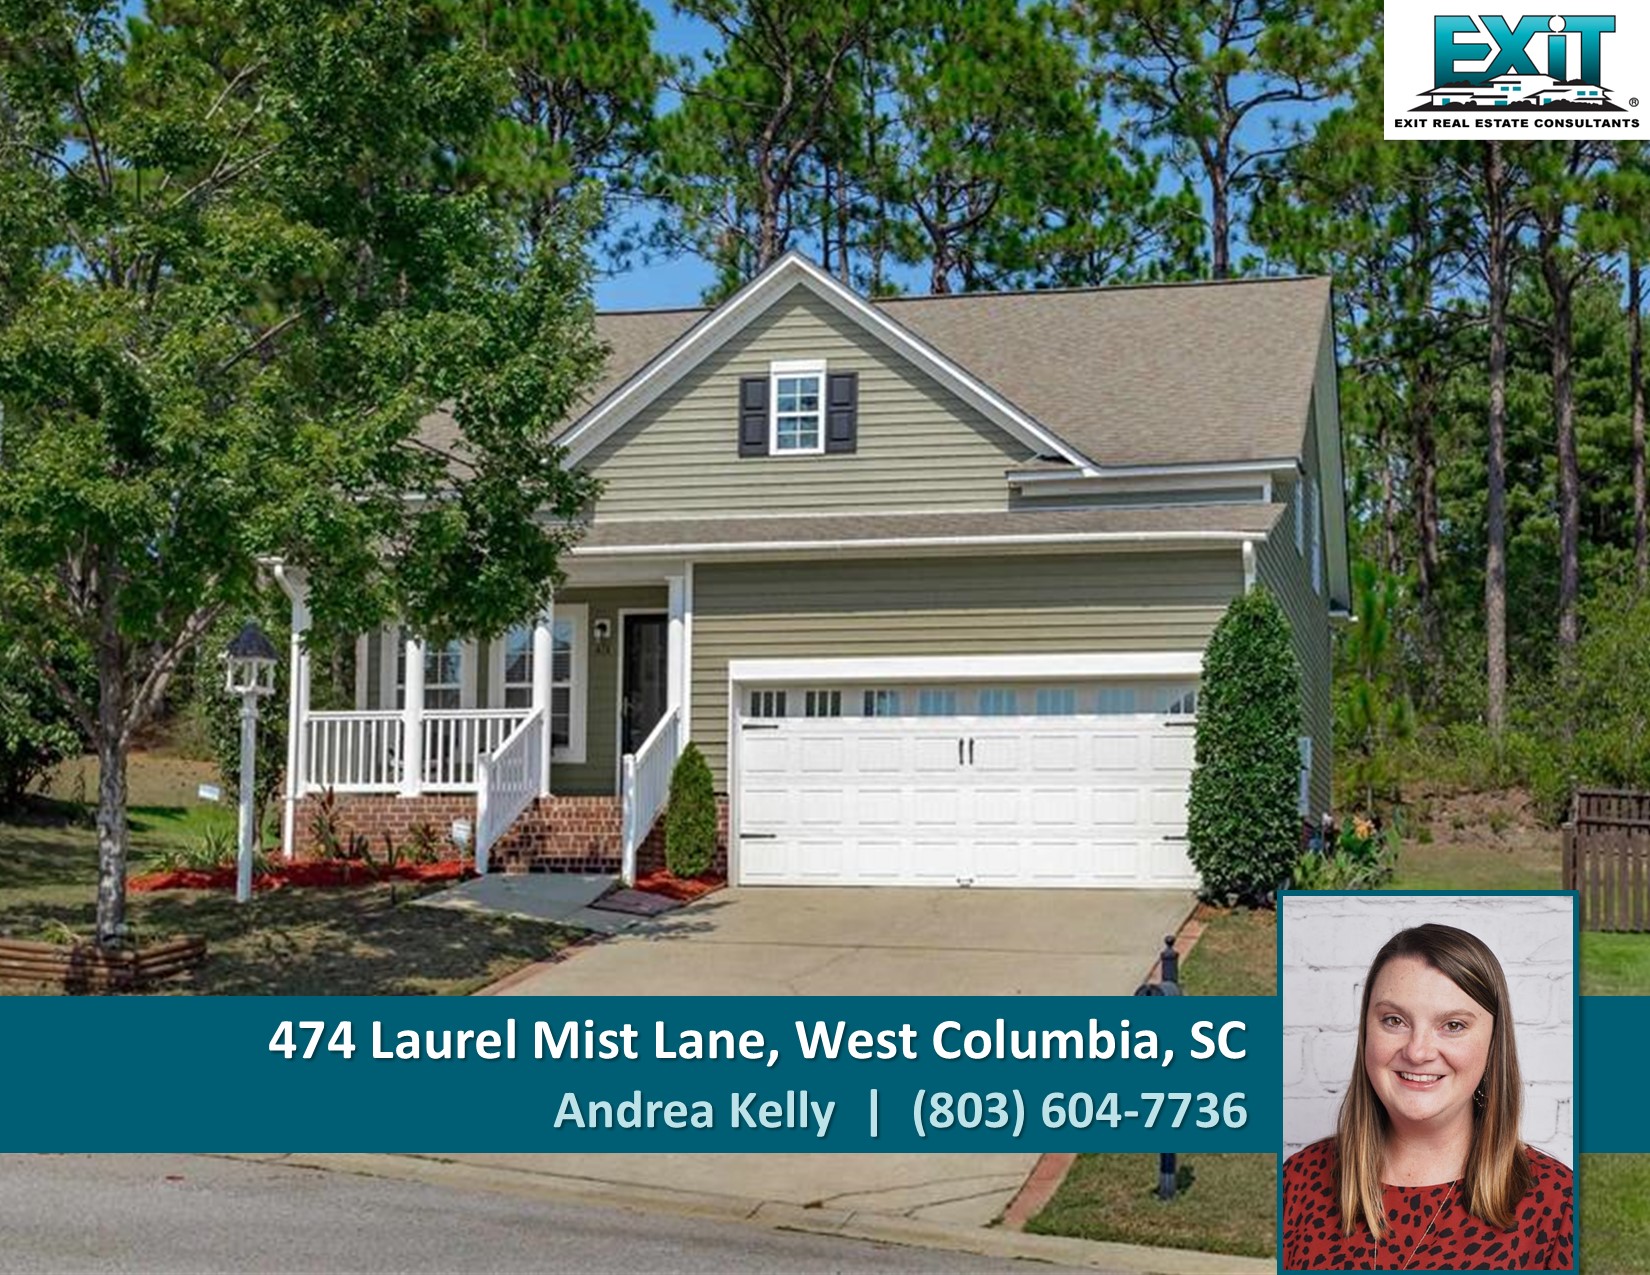 Just listed in Lake Frances - West Columbia